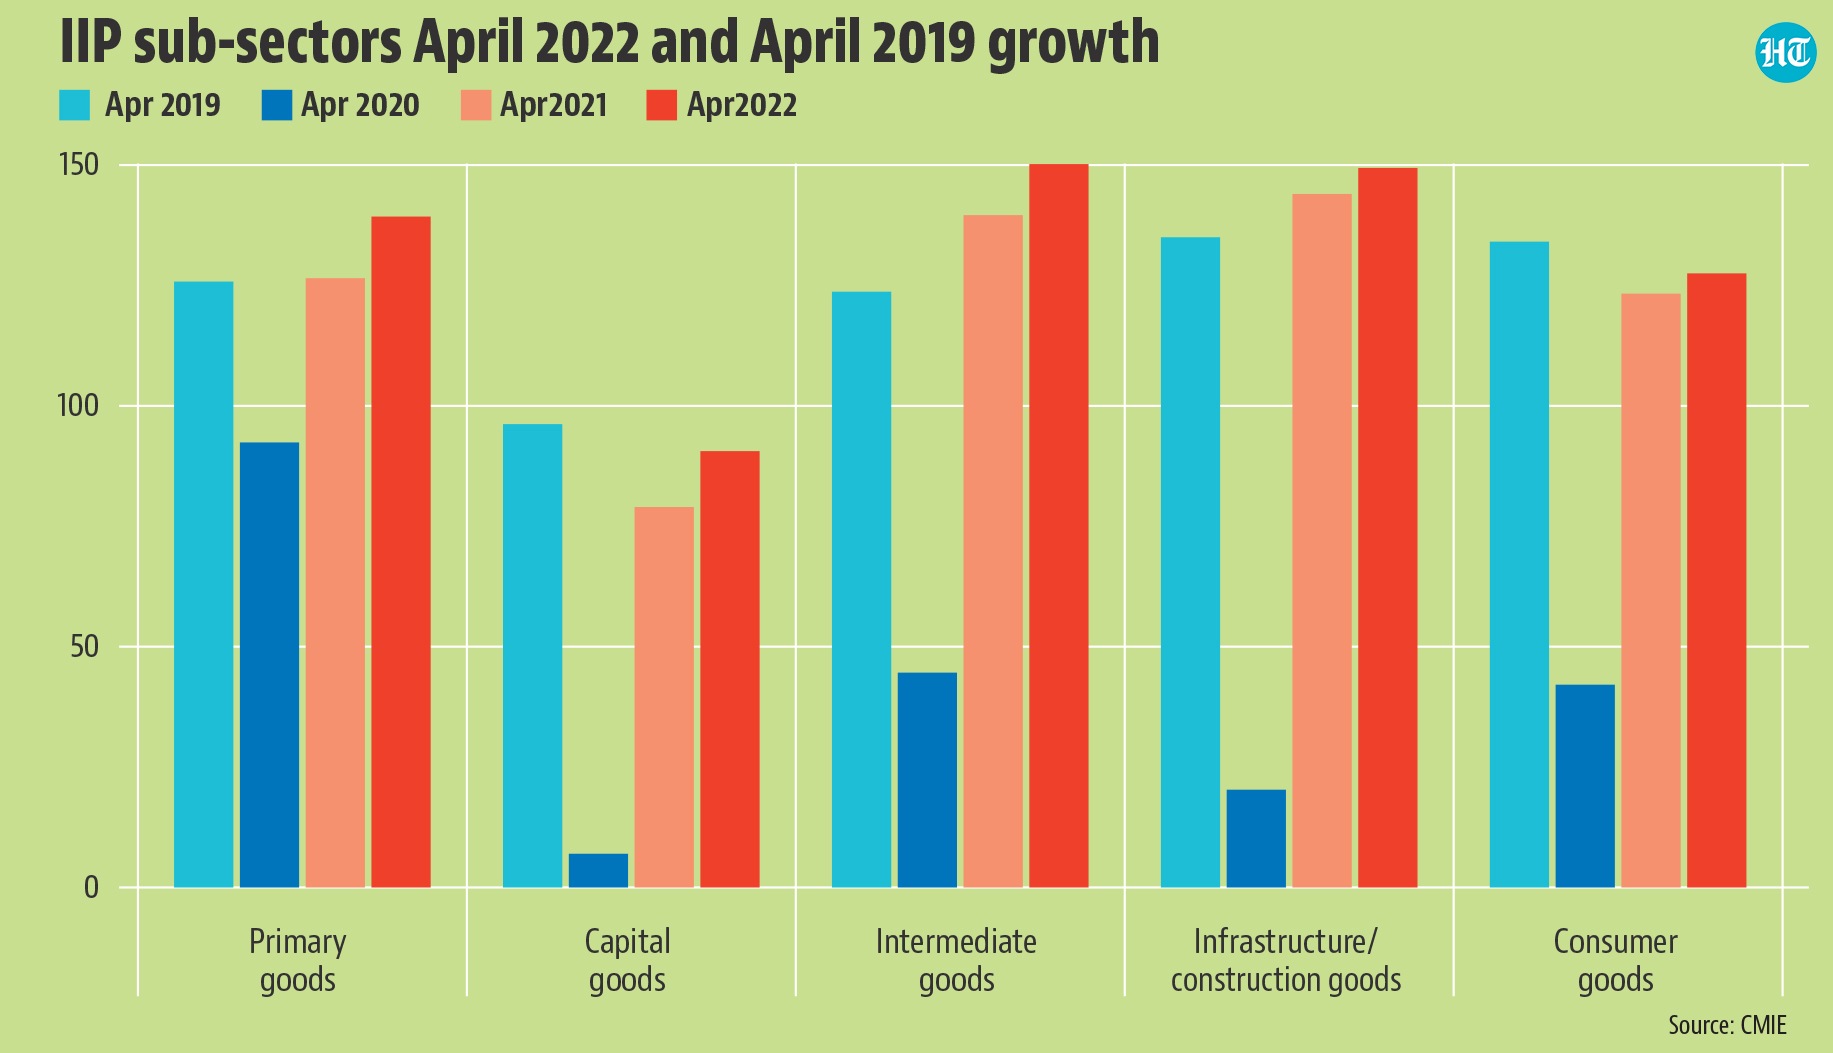 Headline IIP growth reached an eight-month high of 7.1% in April that was significantly above its pre-pandemic (April 2019) value of 126.5